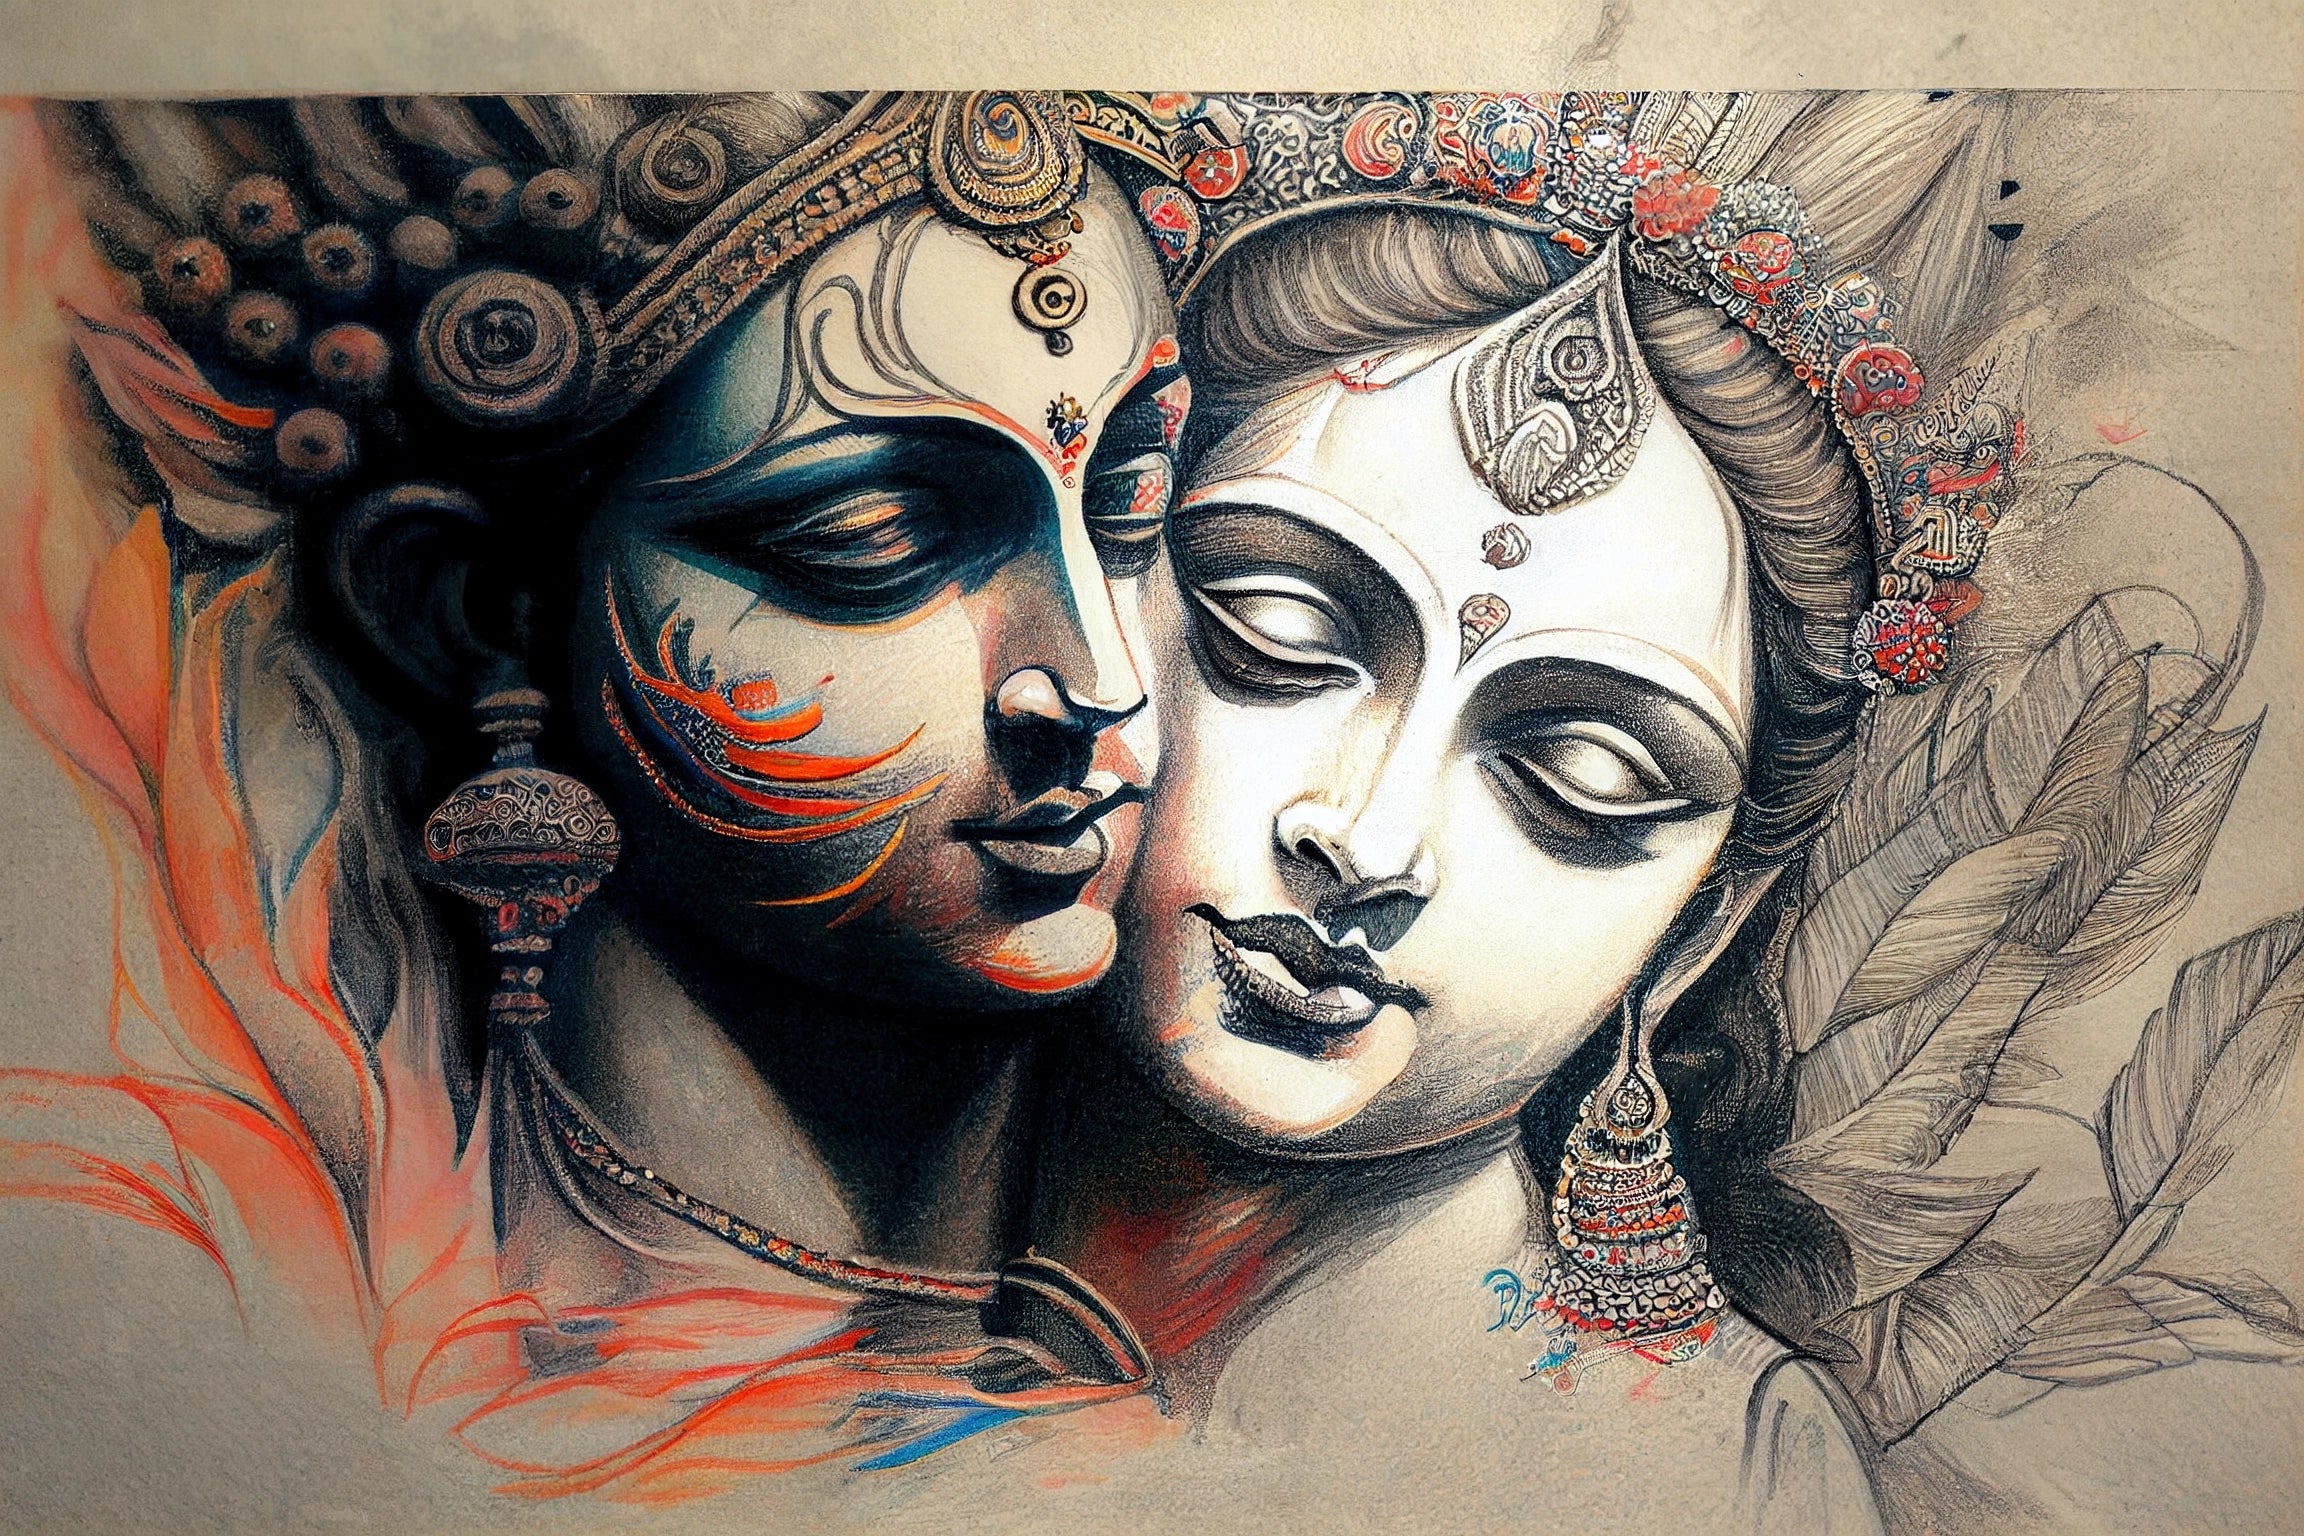 how to draw lord radha and krishna easy pencil sketch drawing,how to draw  lord krishna & radha, - YouTube